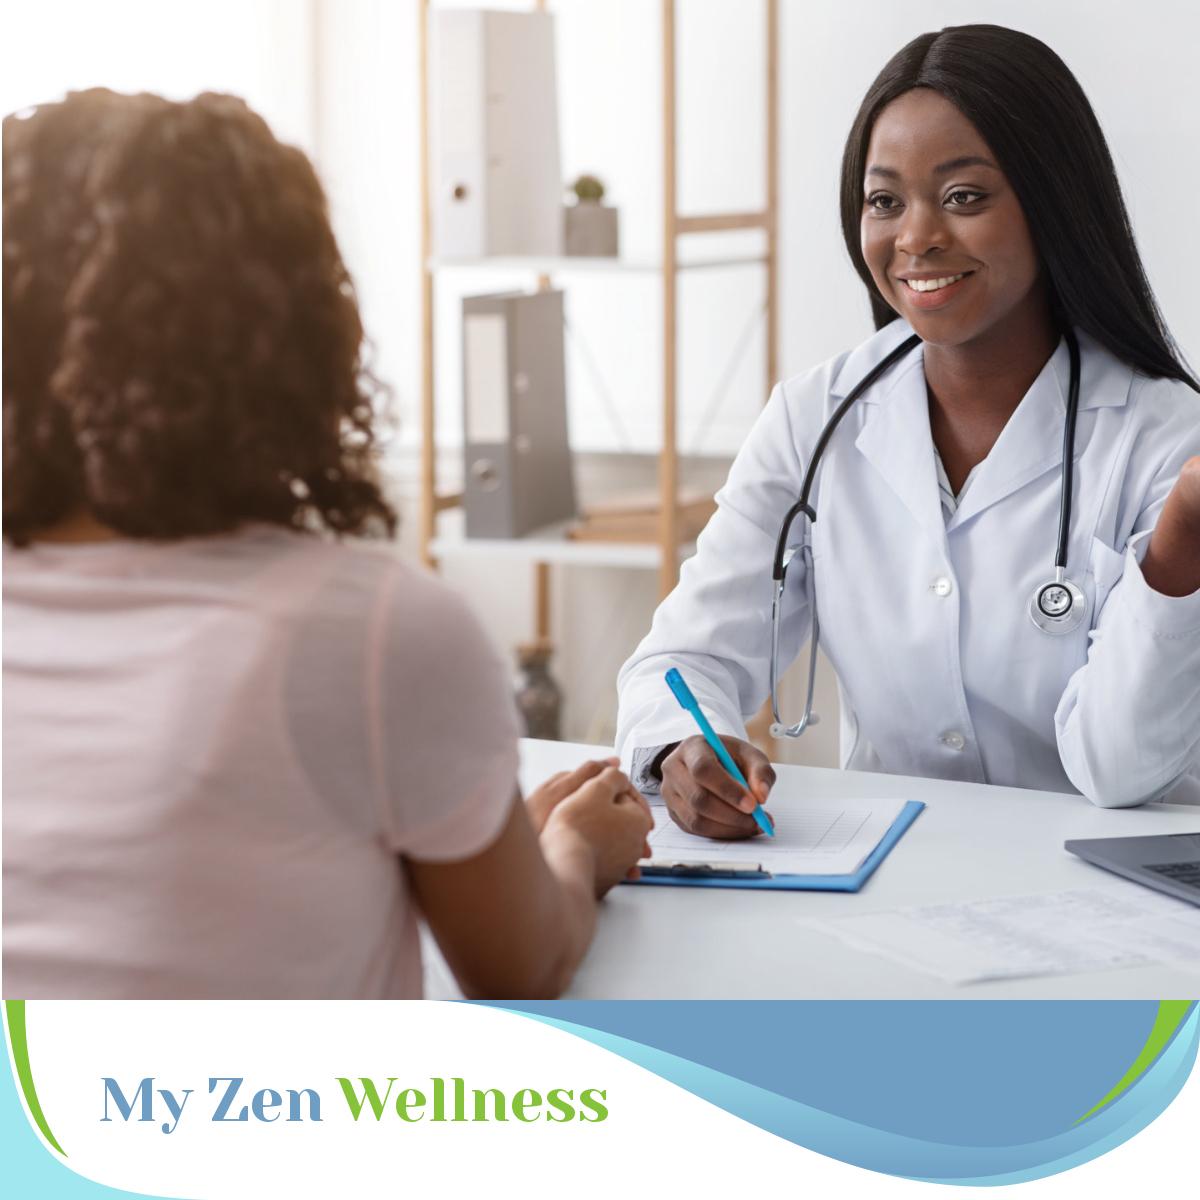 Qualified Professionals

Because wellness is not a game or a minor aspect of health, we have only reliable and qualified professionals to handle our different programs and services. To know more, please don't hesitate to contact us.

#QualifiedProfessionals #MyZenWellness